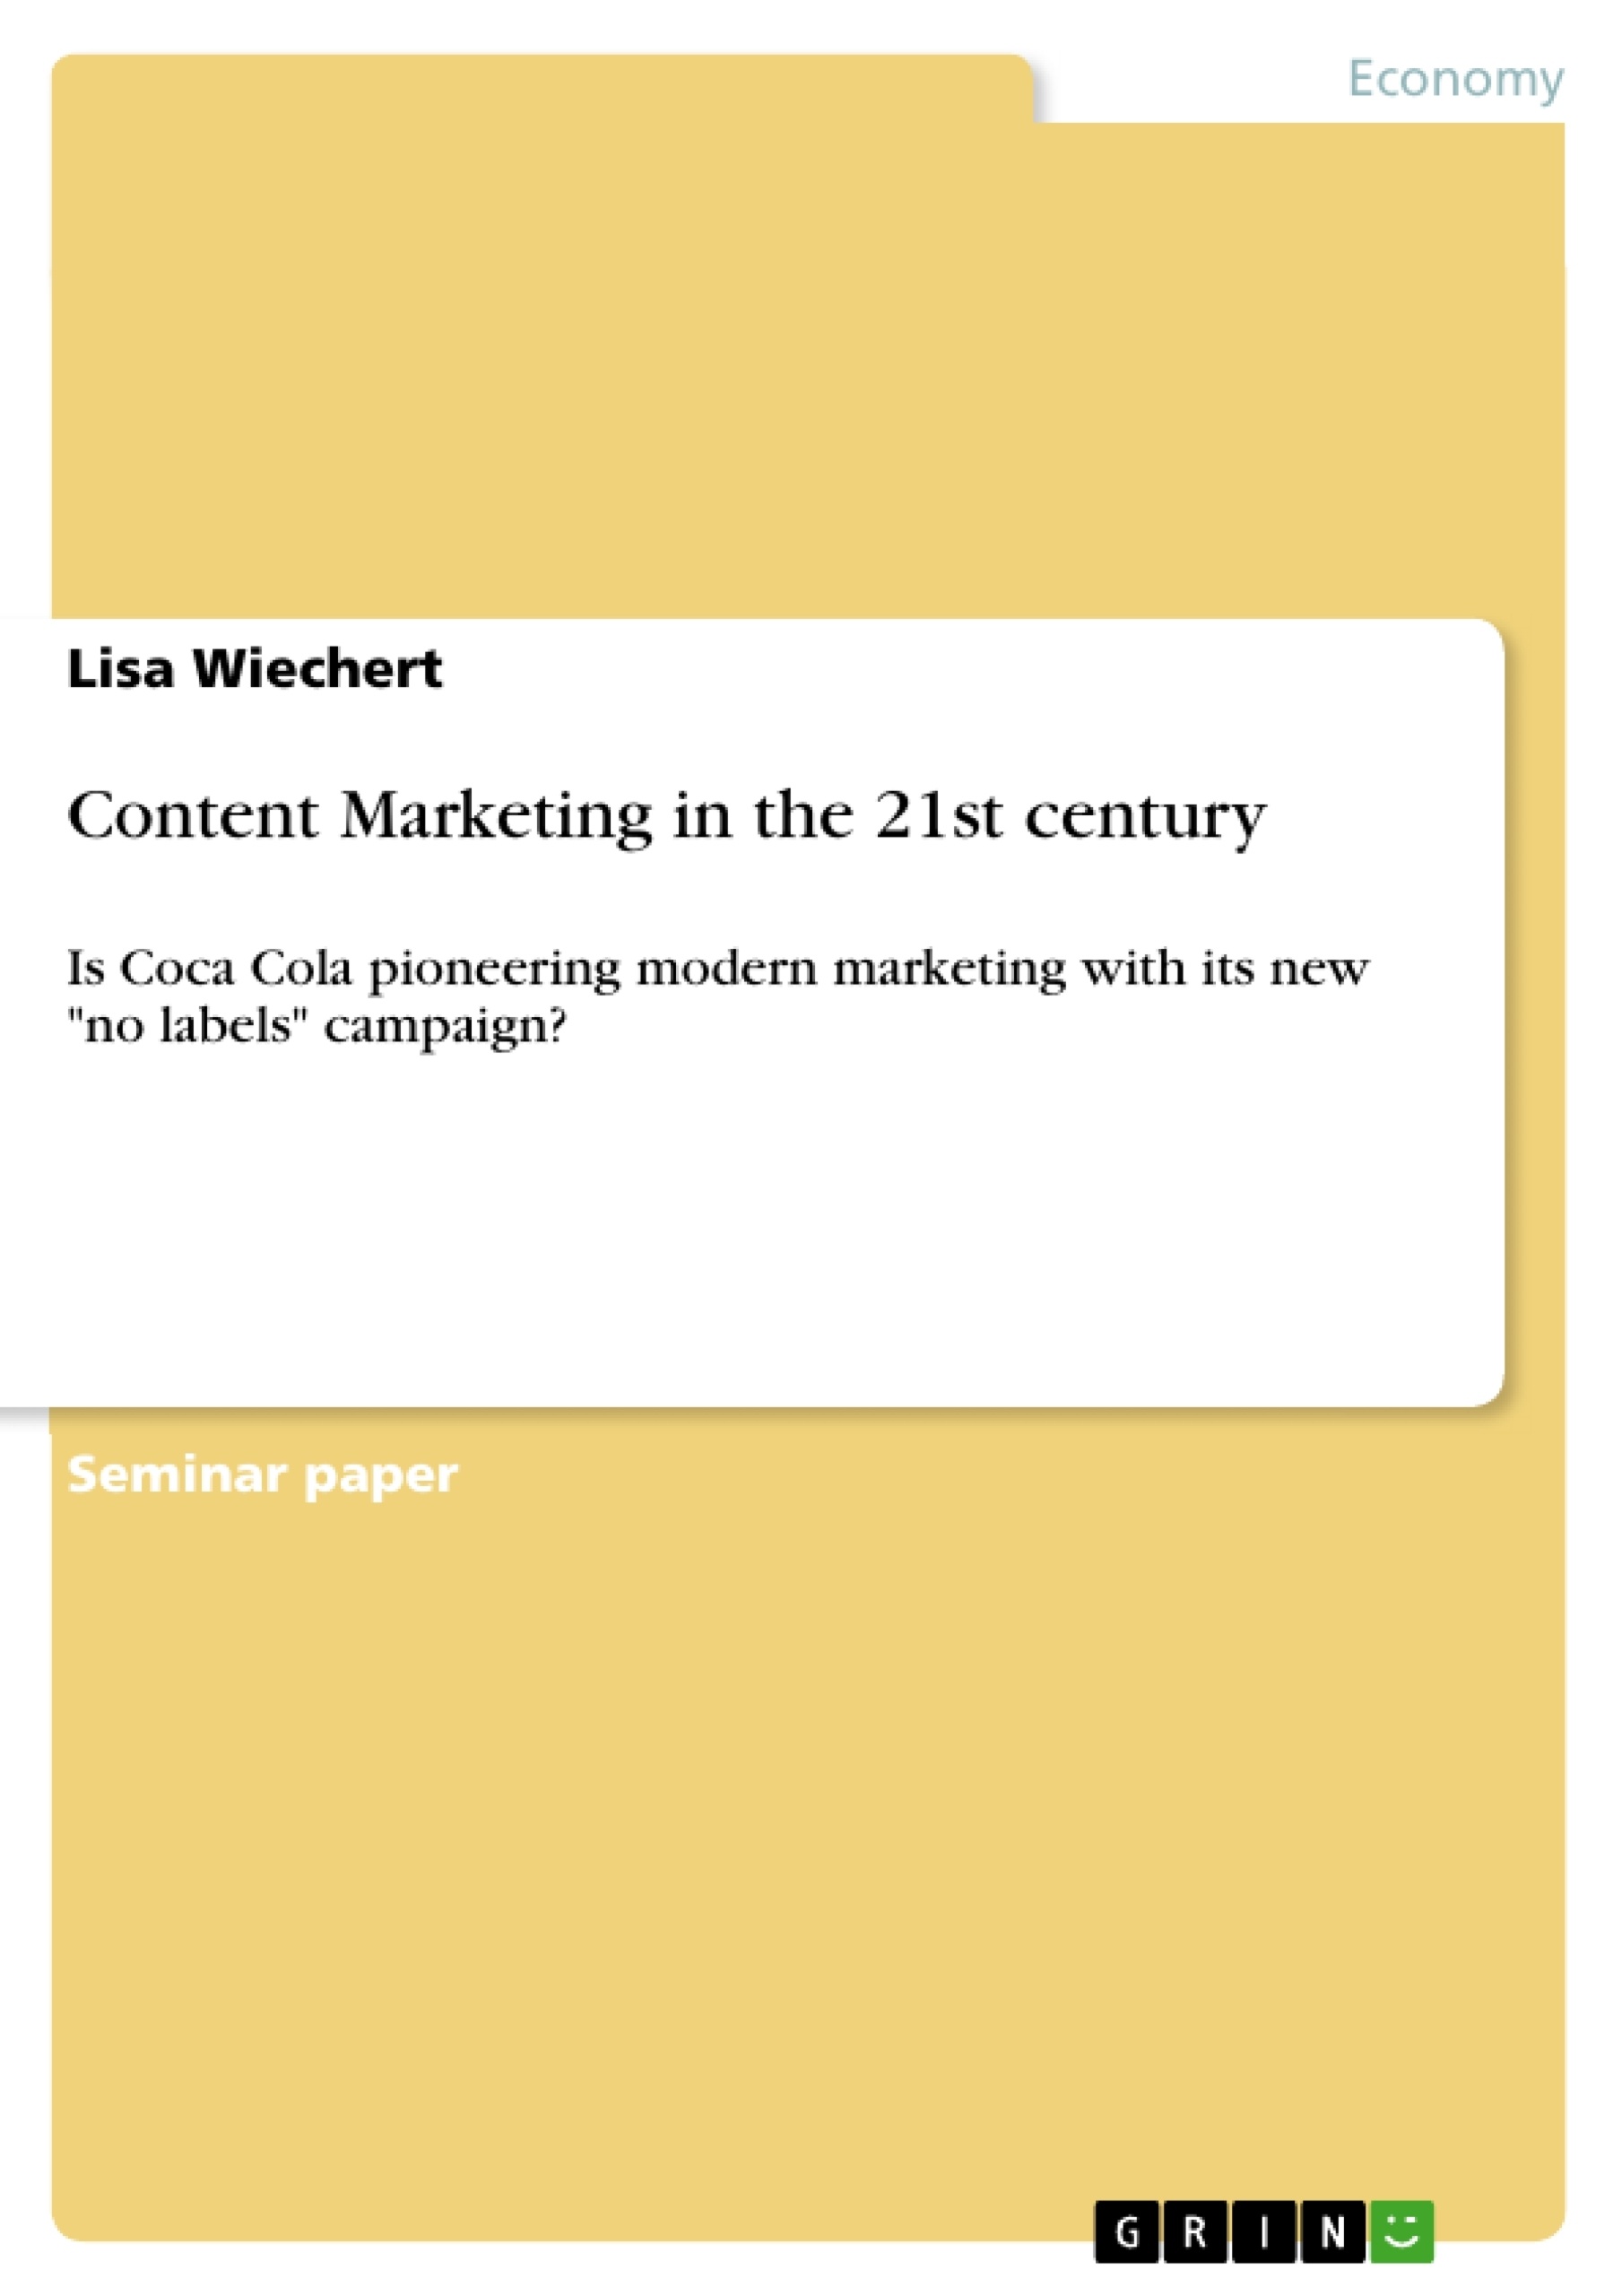 Title: Content Marketing in the 21st century